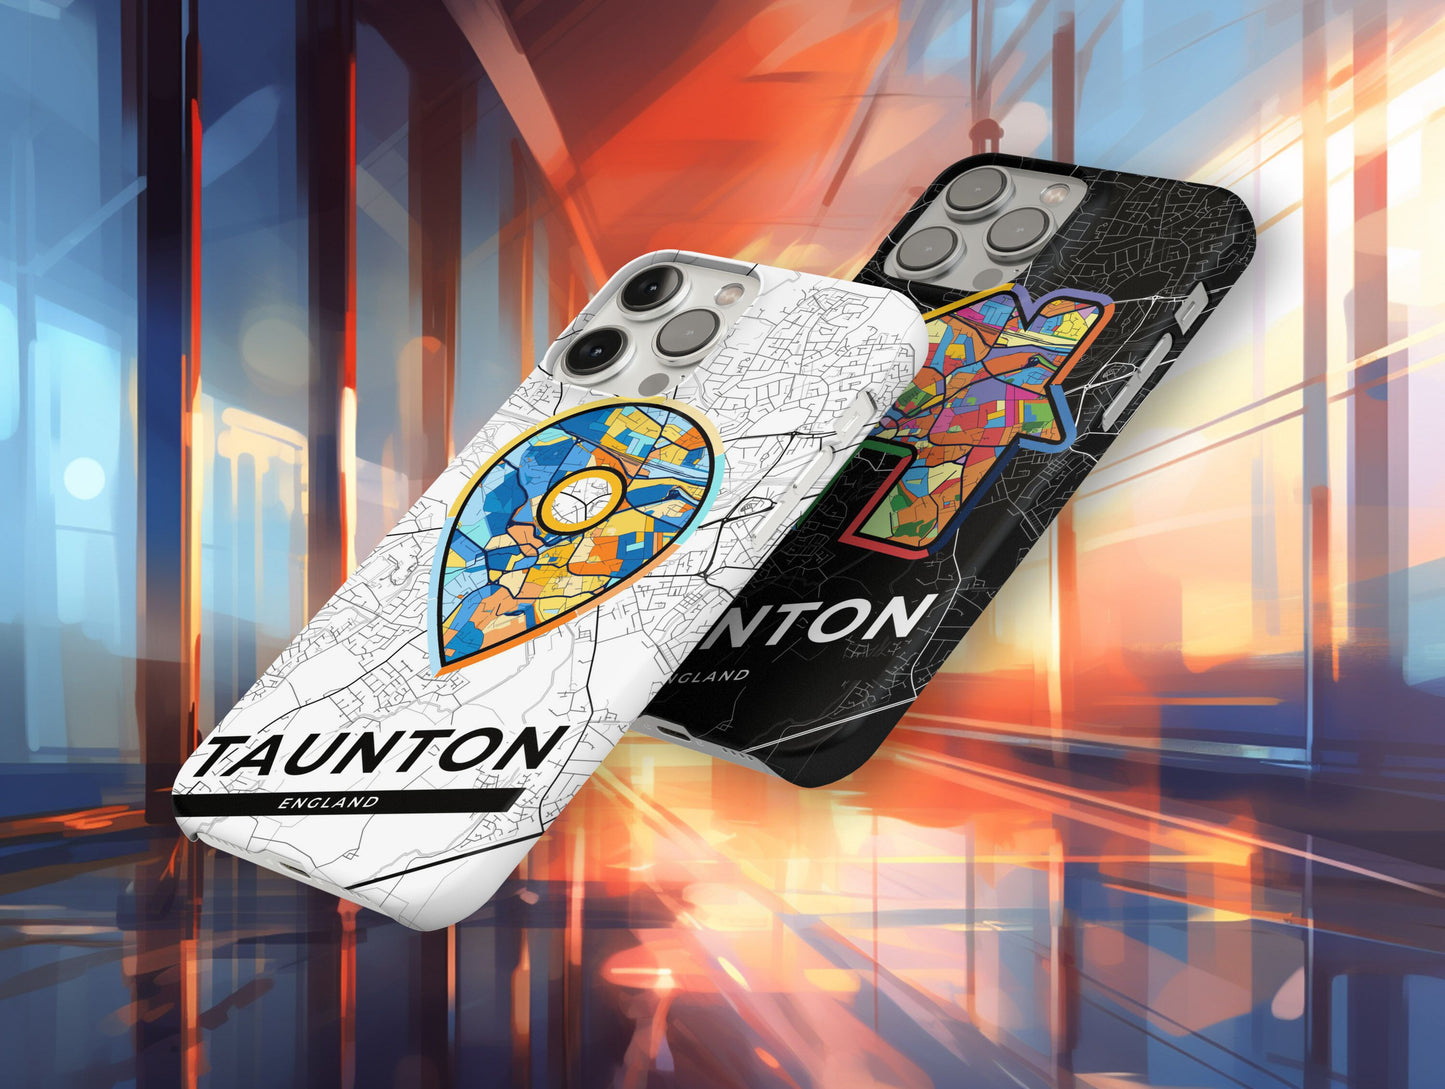 Taunton England slim phone case with colorful icon